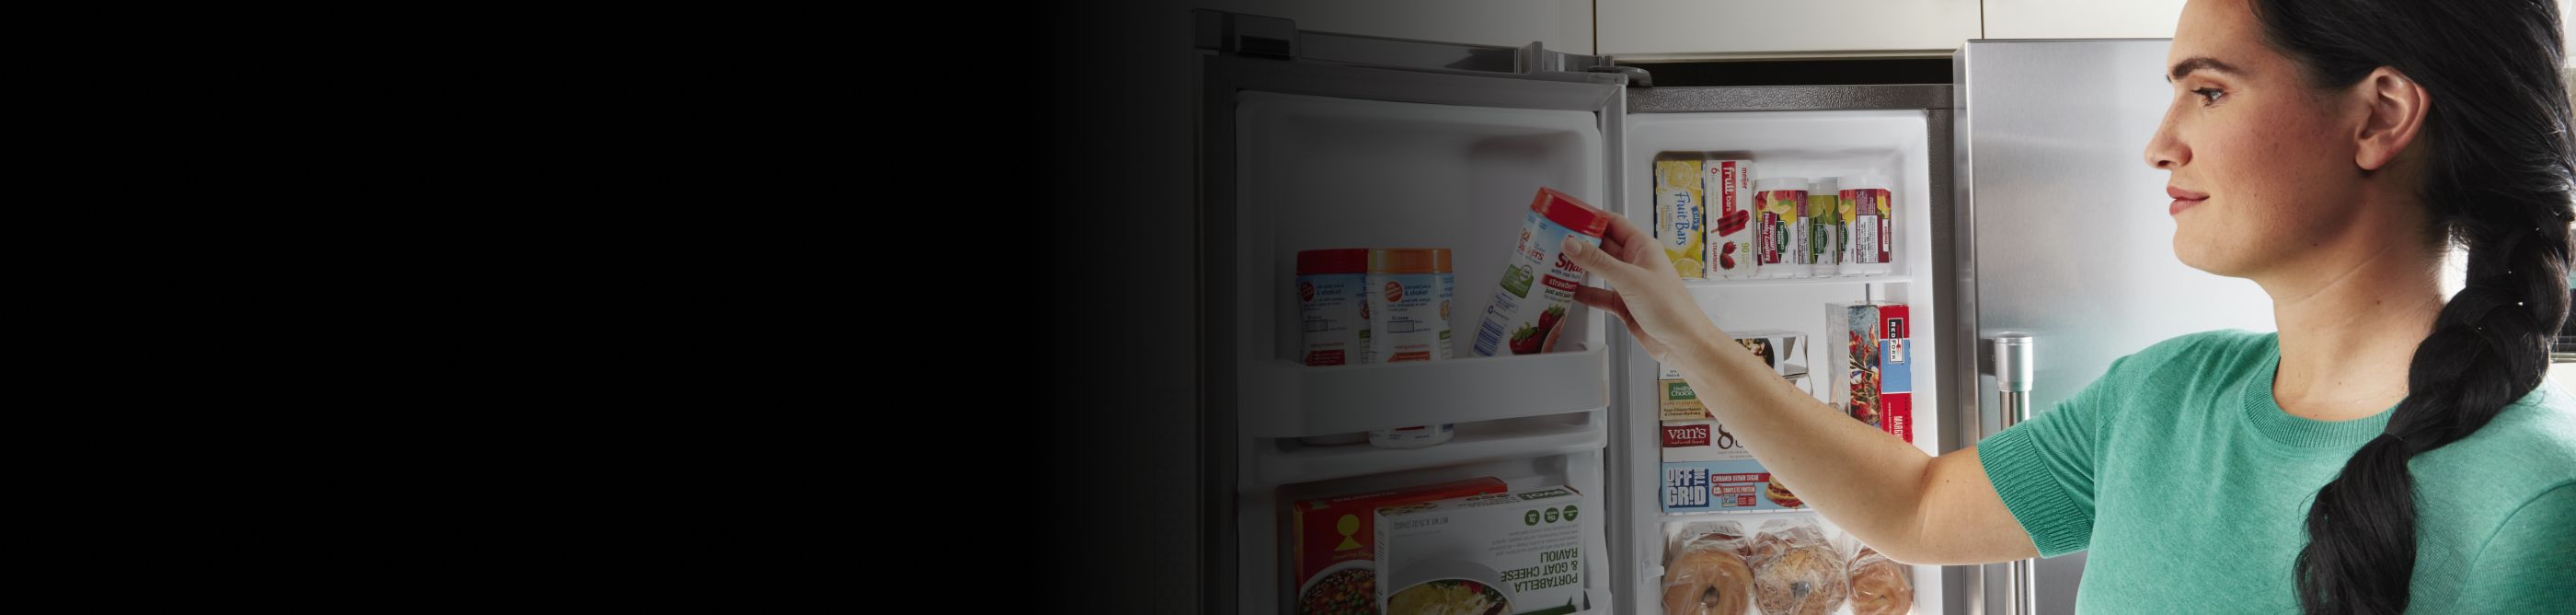 Person removing frozen food from a side-by-side fridge freezer compartment